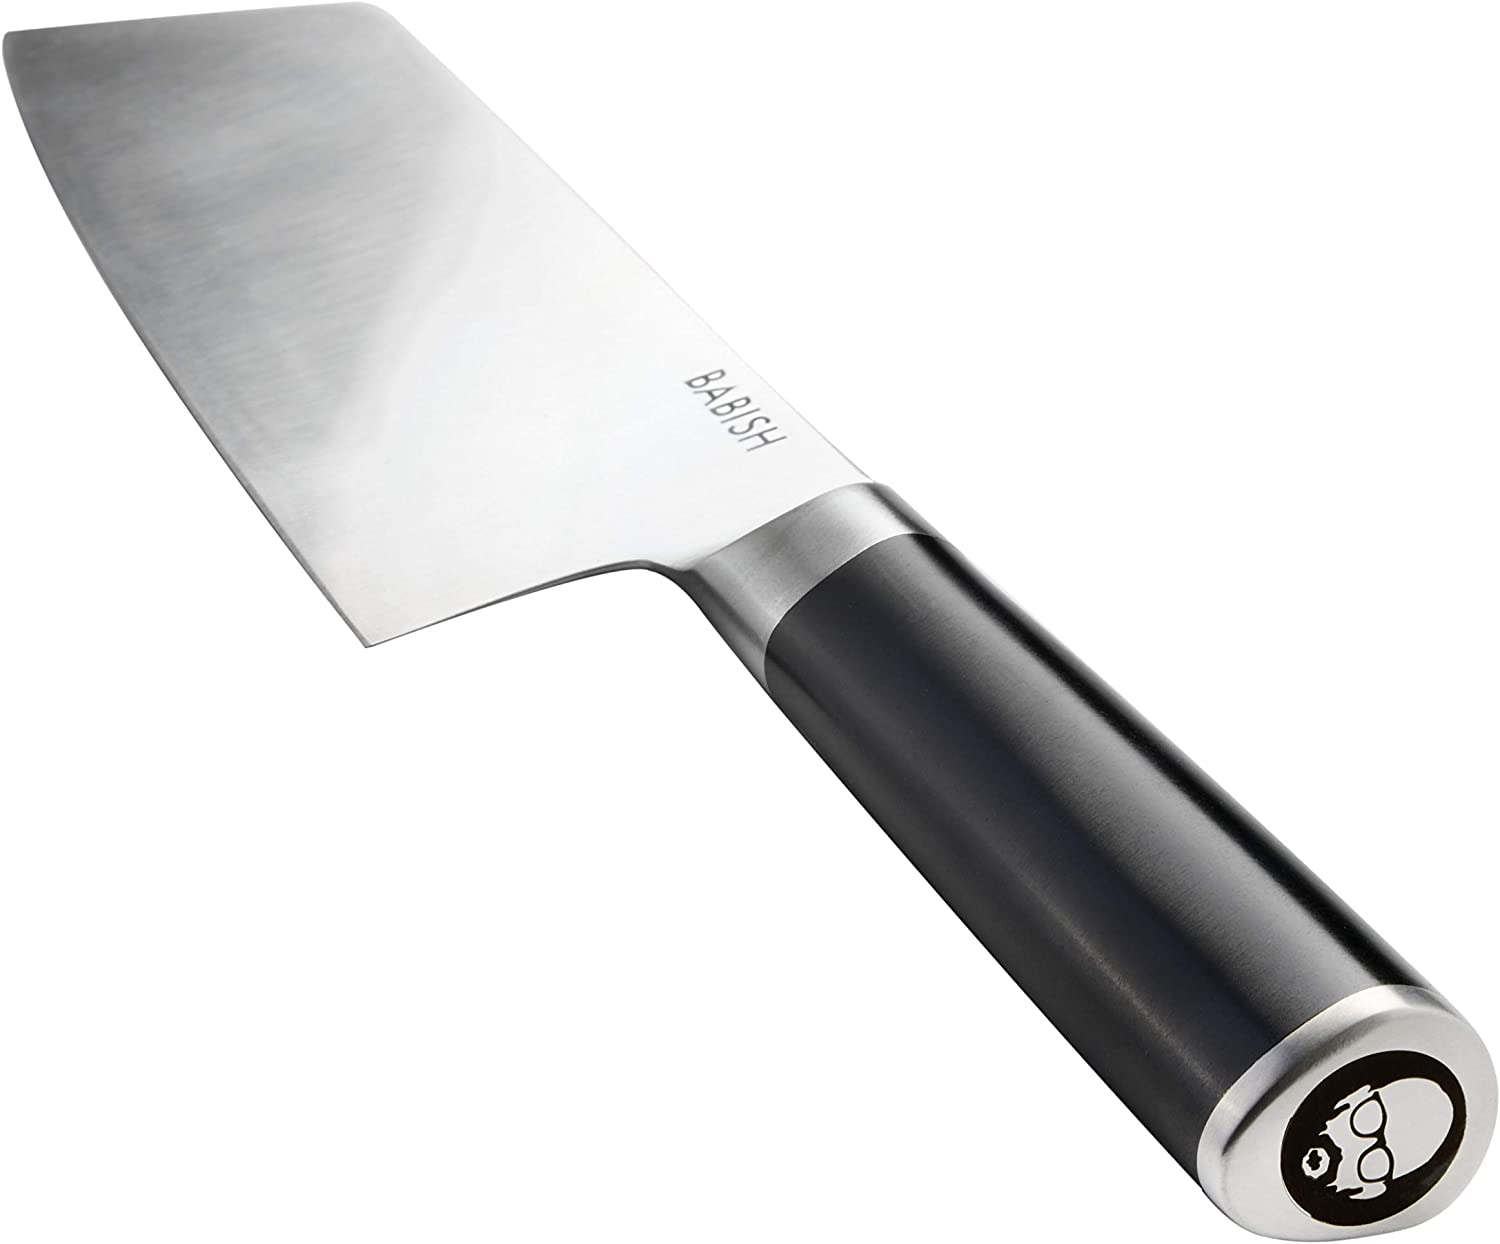 Babish High-Carbon 1.4116 German Steel 6.5 Inch Full Tang, Forged Cleaver  Kitchen Knife